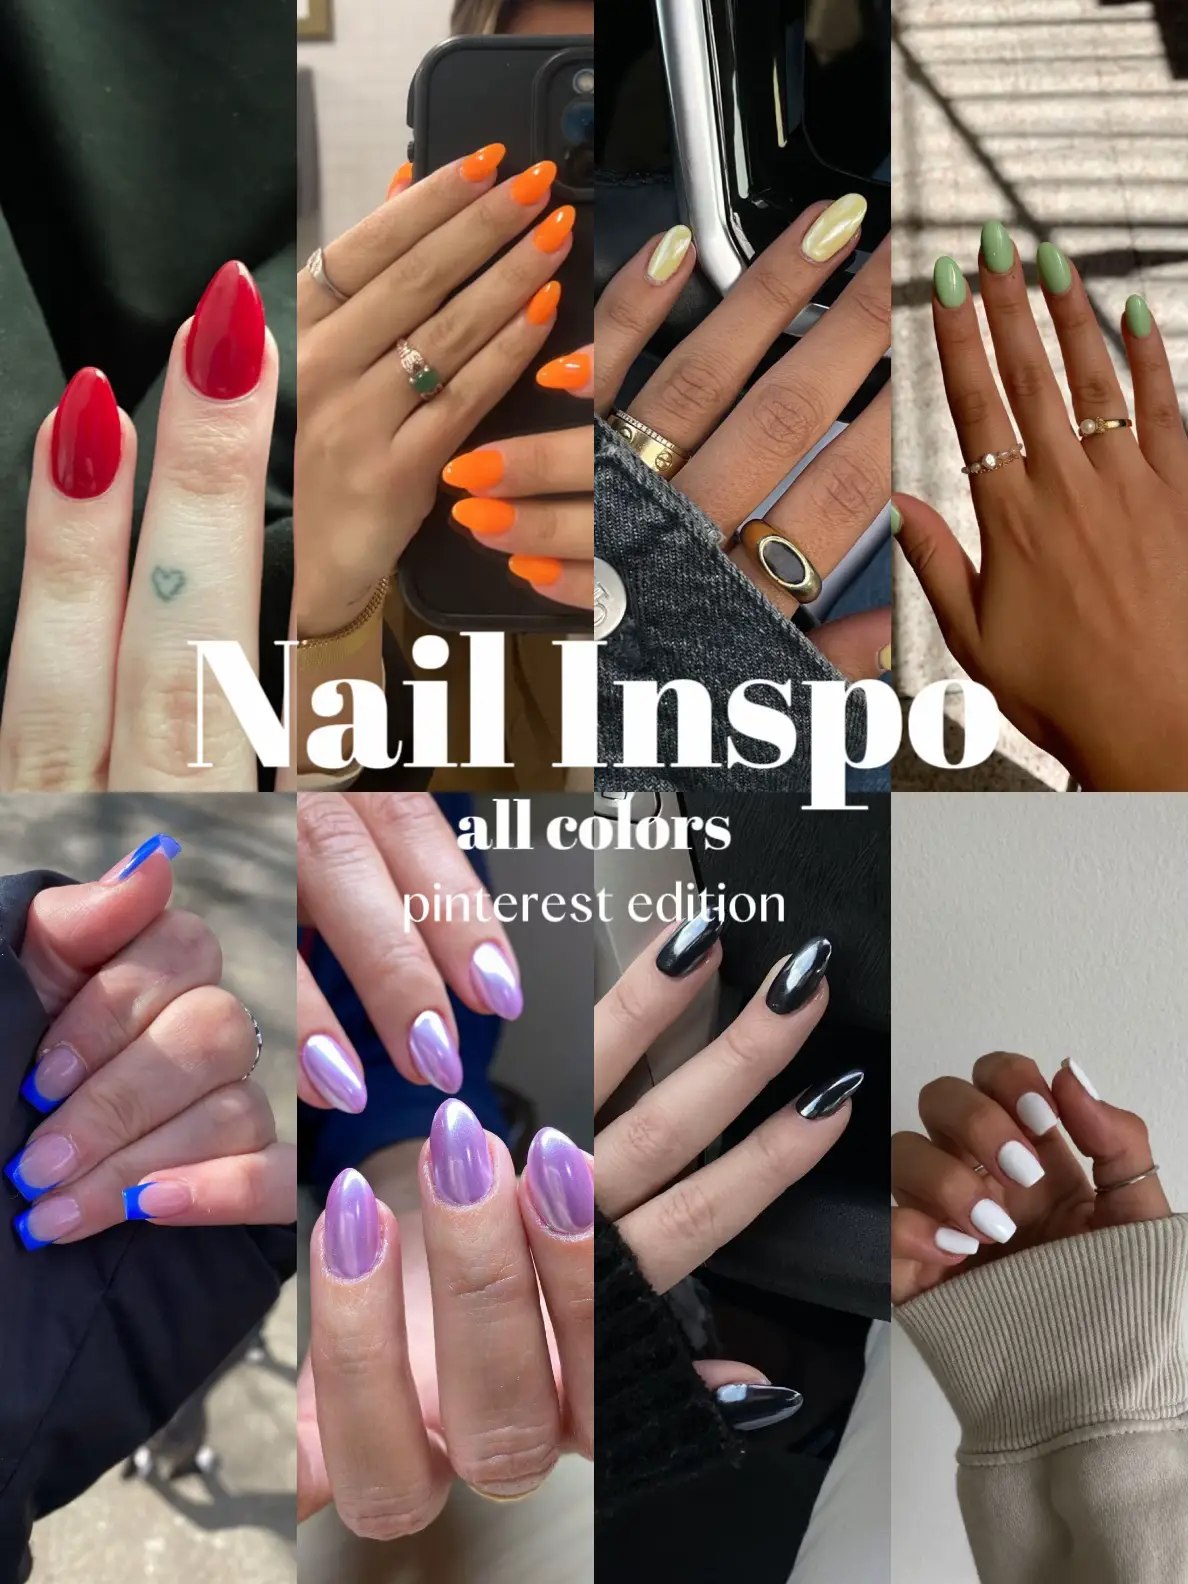 Nail Inspo's images